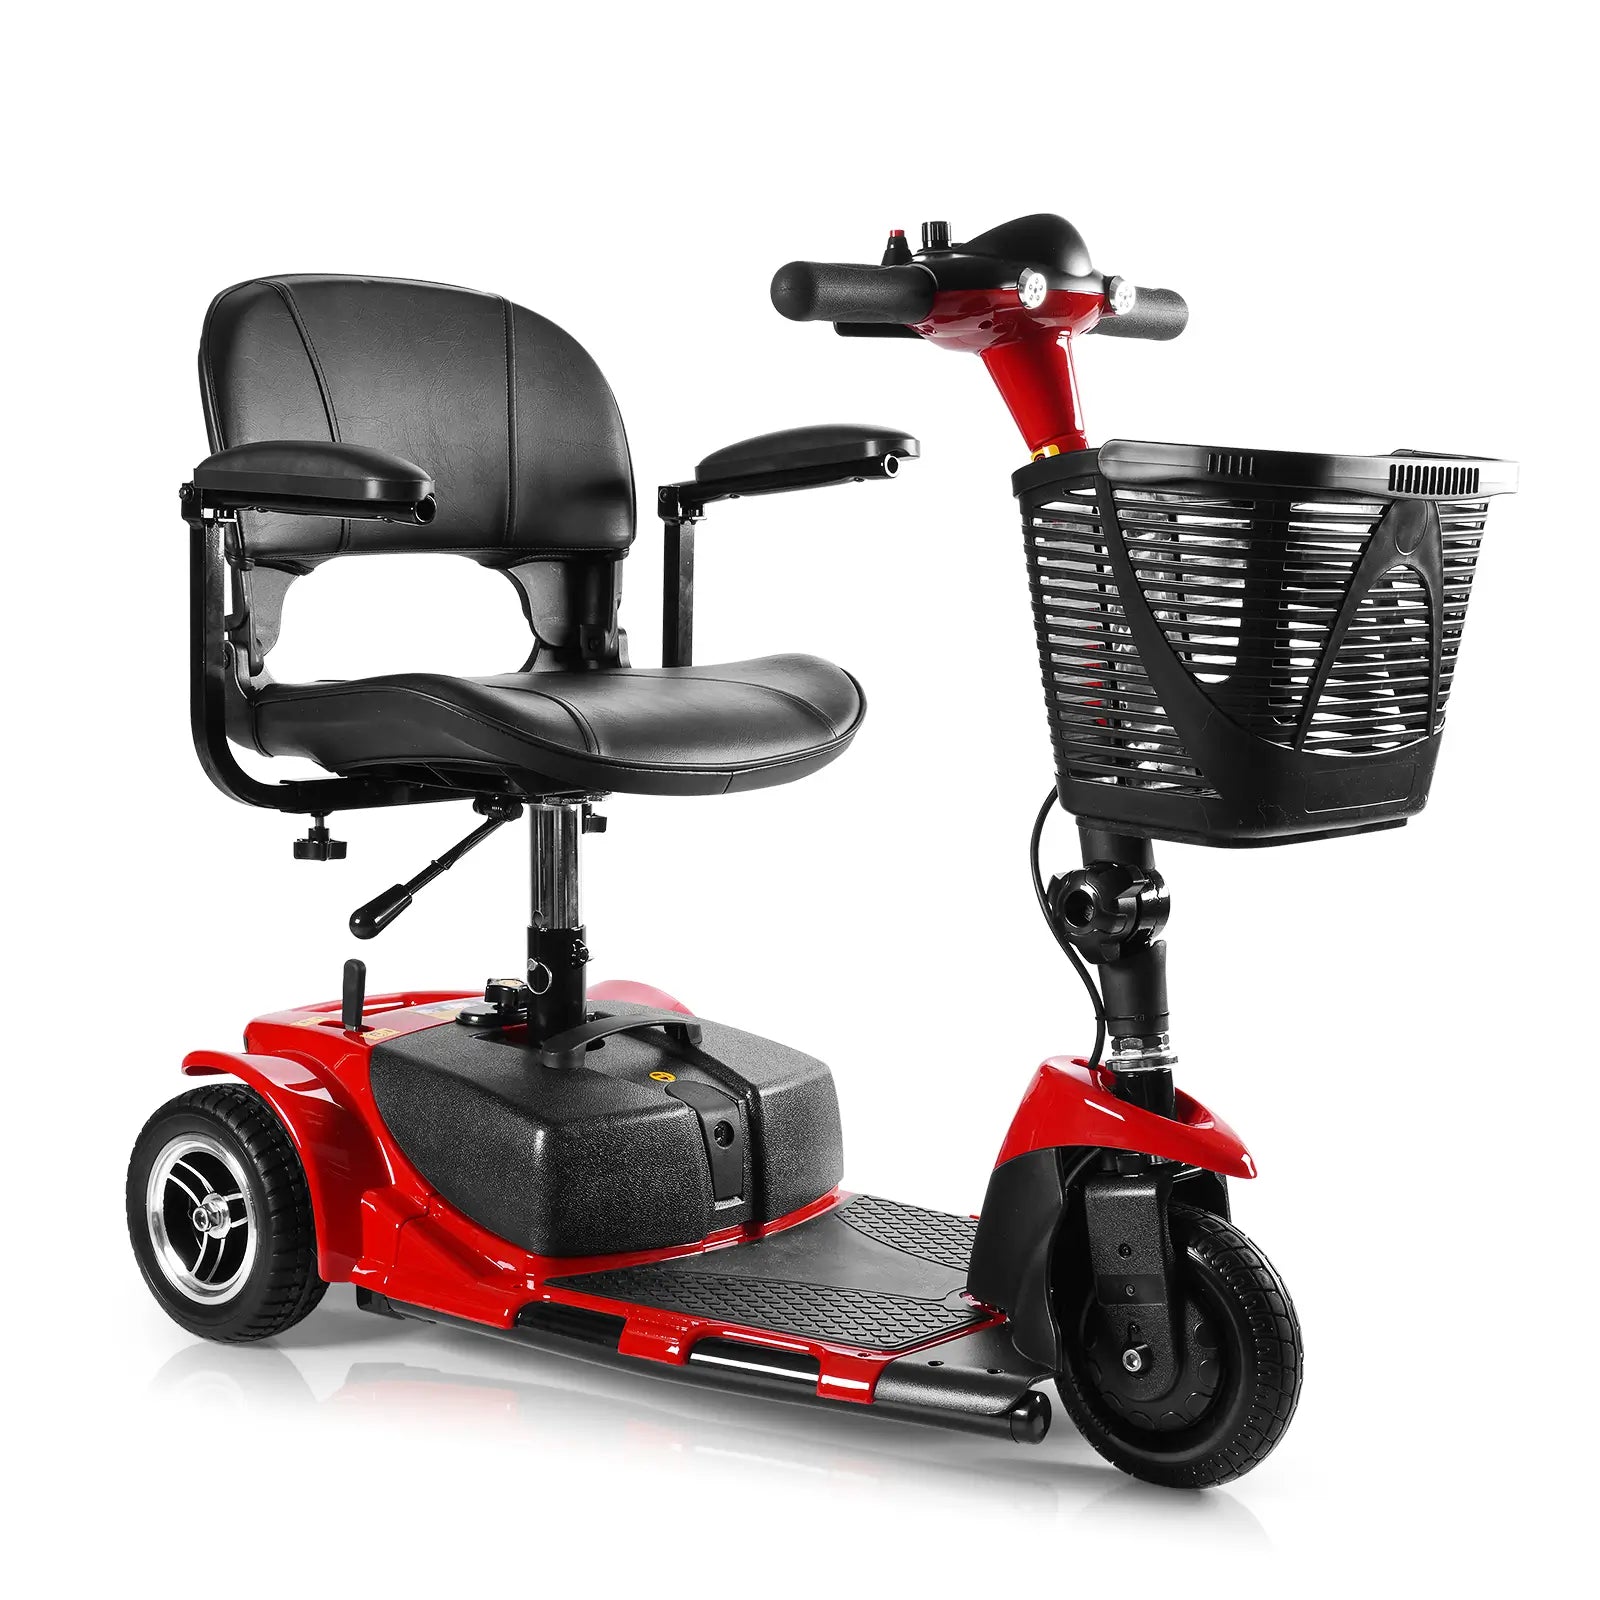 Soulout 3 Wheel Electric Mobility Scooter-Red